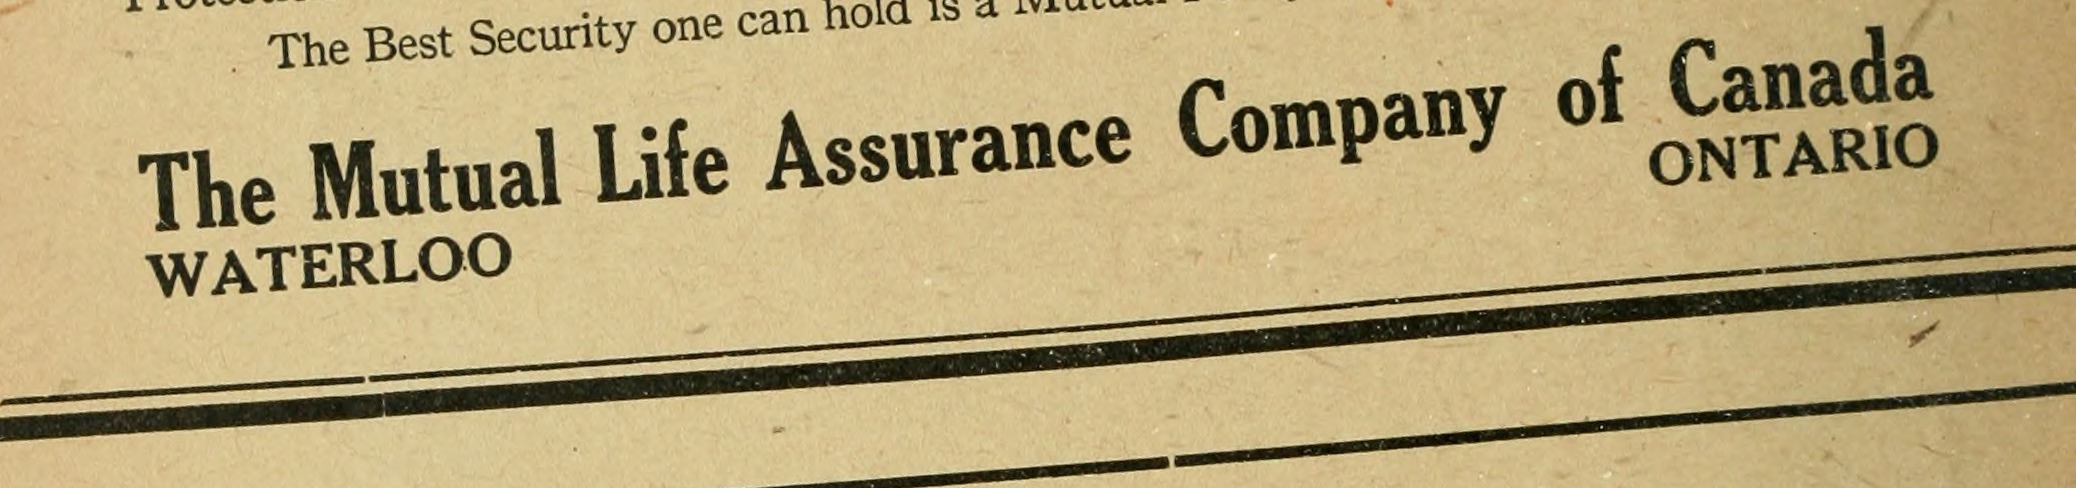 Image from page 33 of "Canadian journal of public health" (1910)